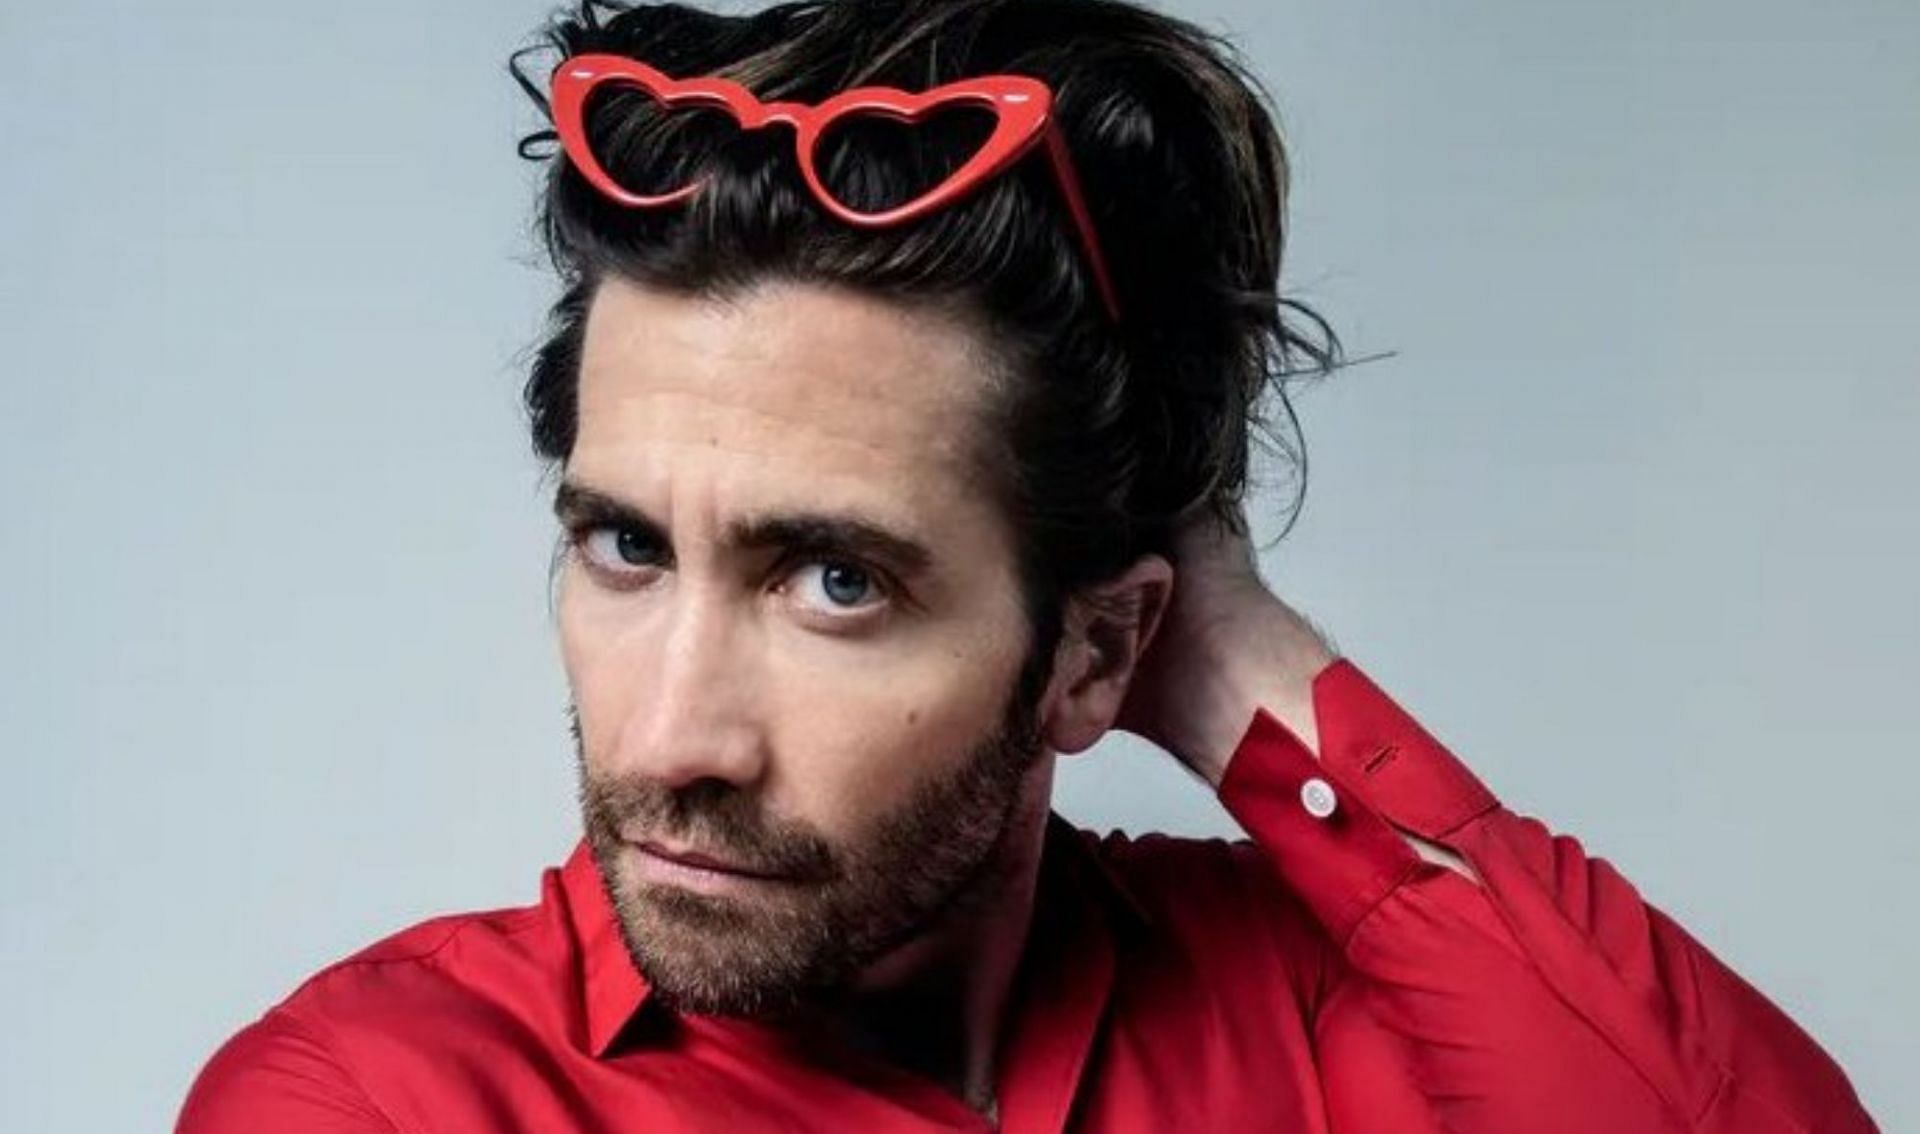 Fans are convinced Jake Gyllenhaal referred to Taylor Swift&#039;s &#039;All Too Well&#039; in new photoshoot (Image via Film Updates/Twitter)